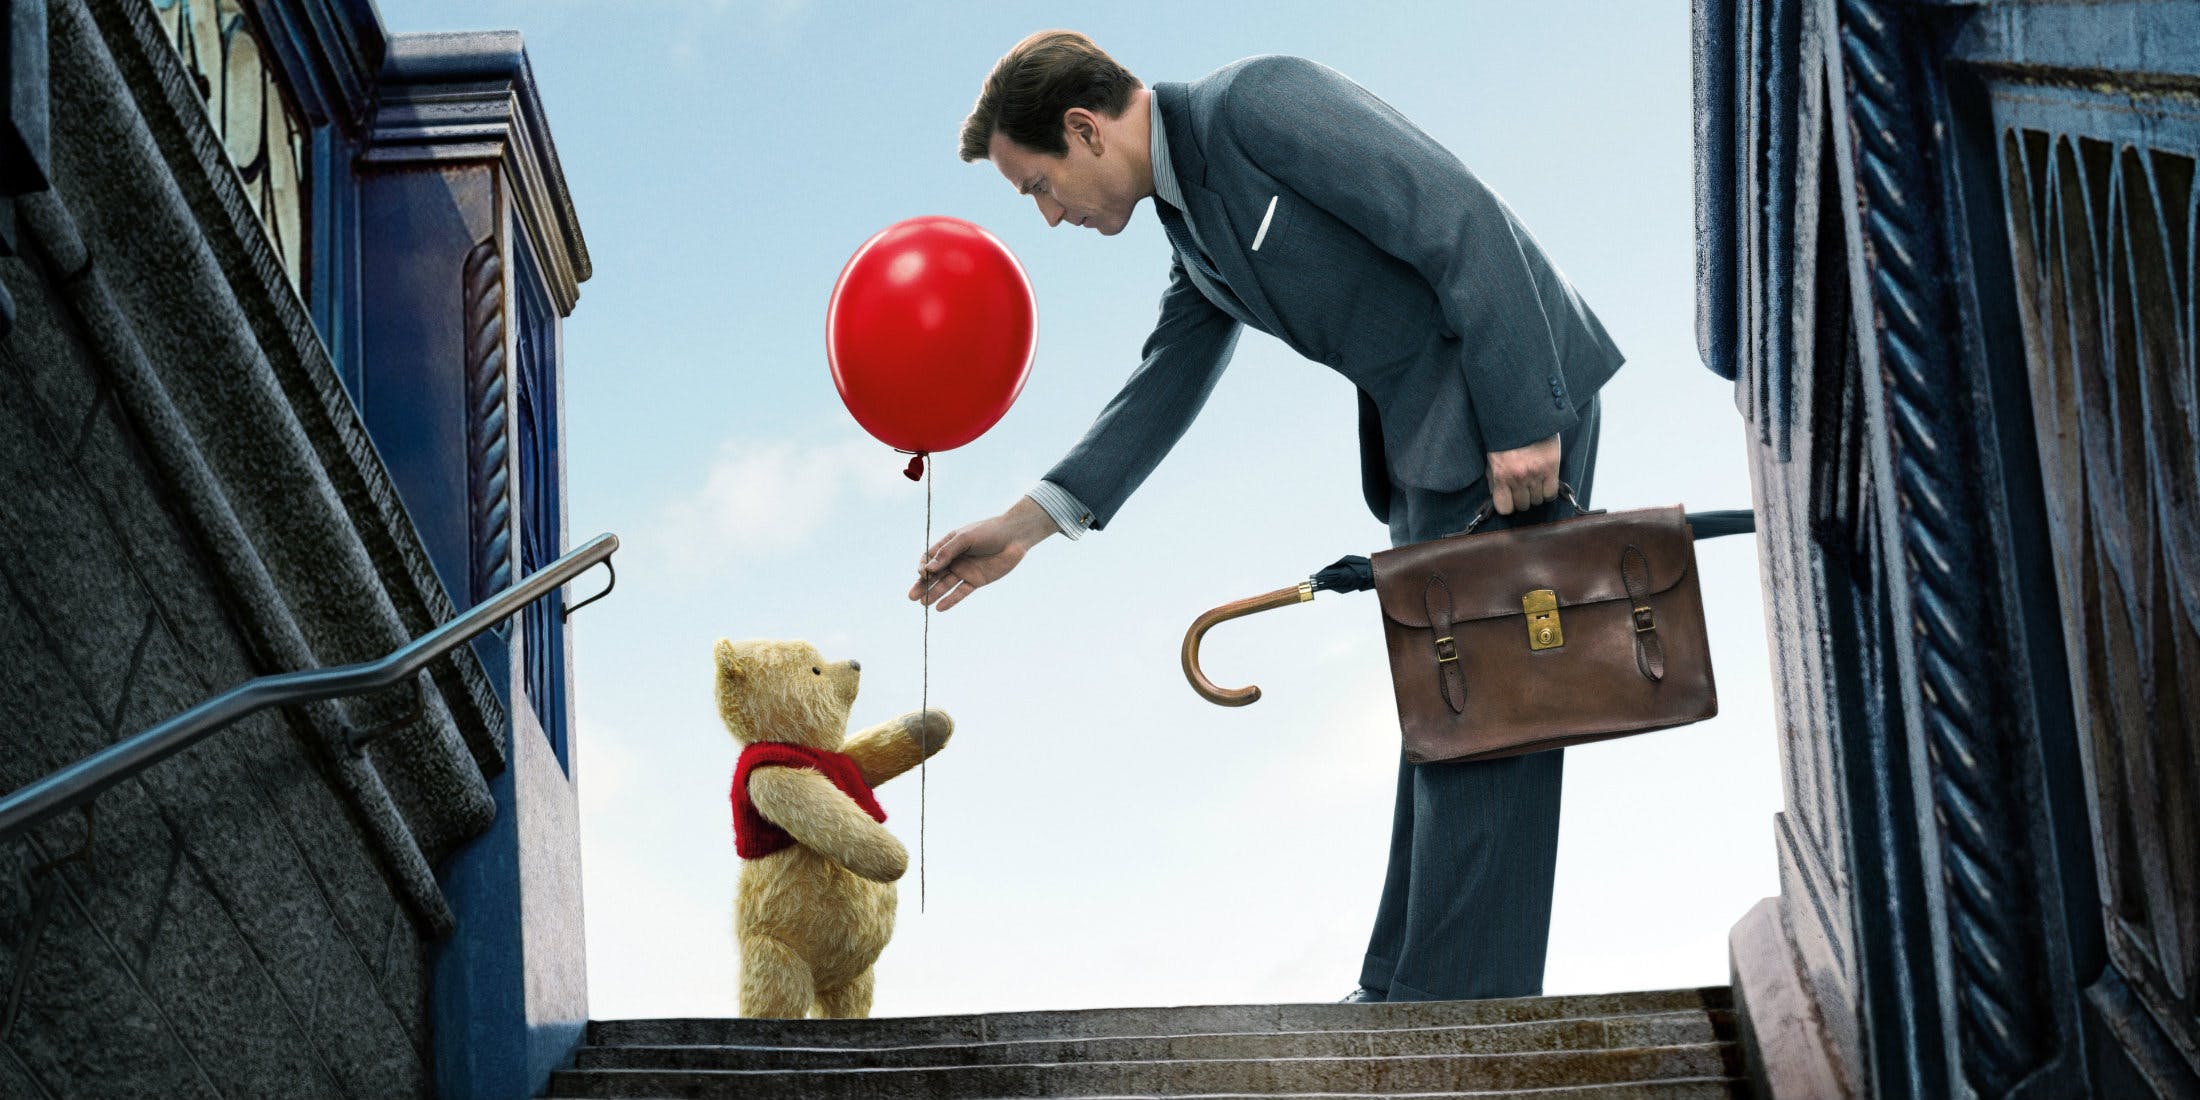 Winnie the Pooh hands Christopher Robin (Ewan McGregor) a red balloon in the poster for the Disney movie